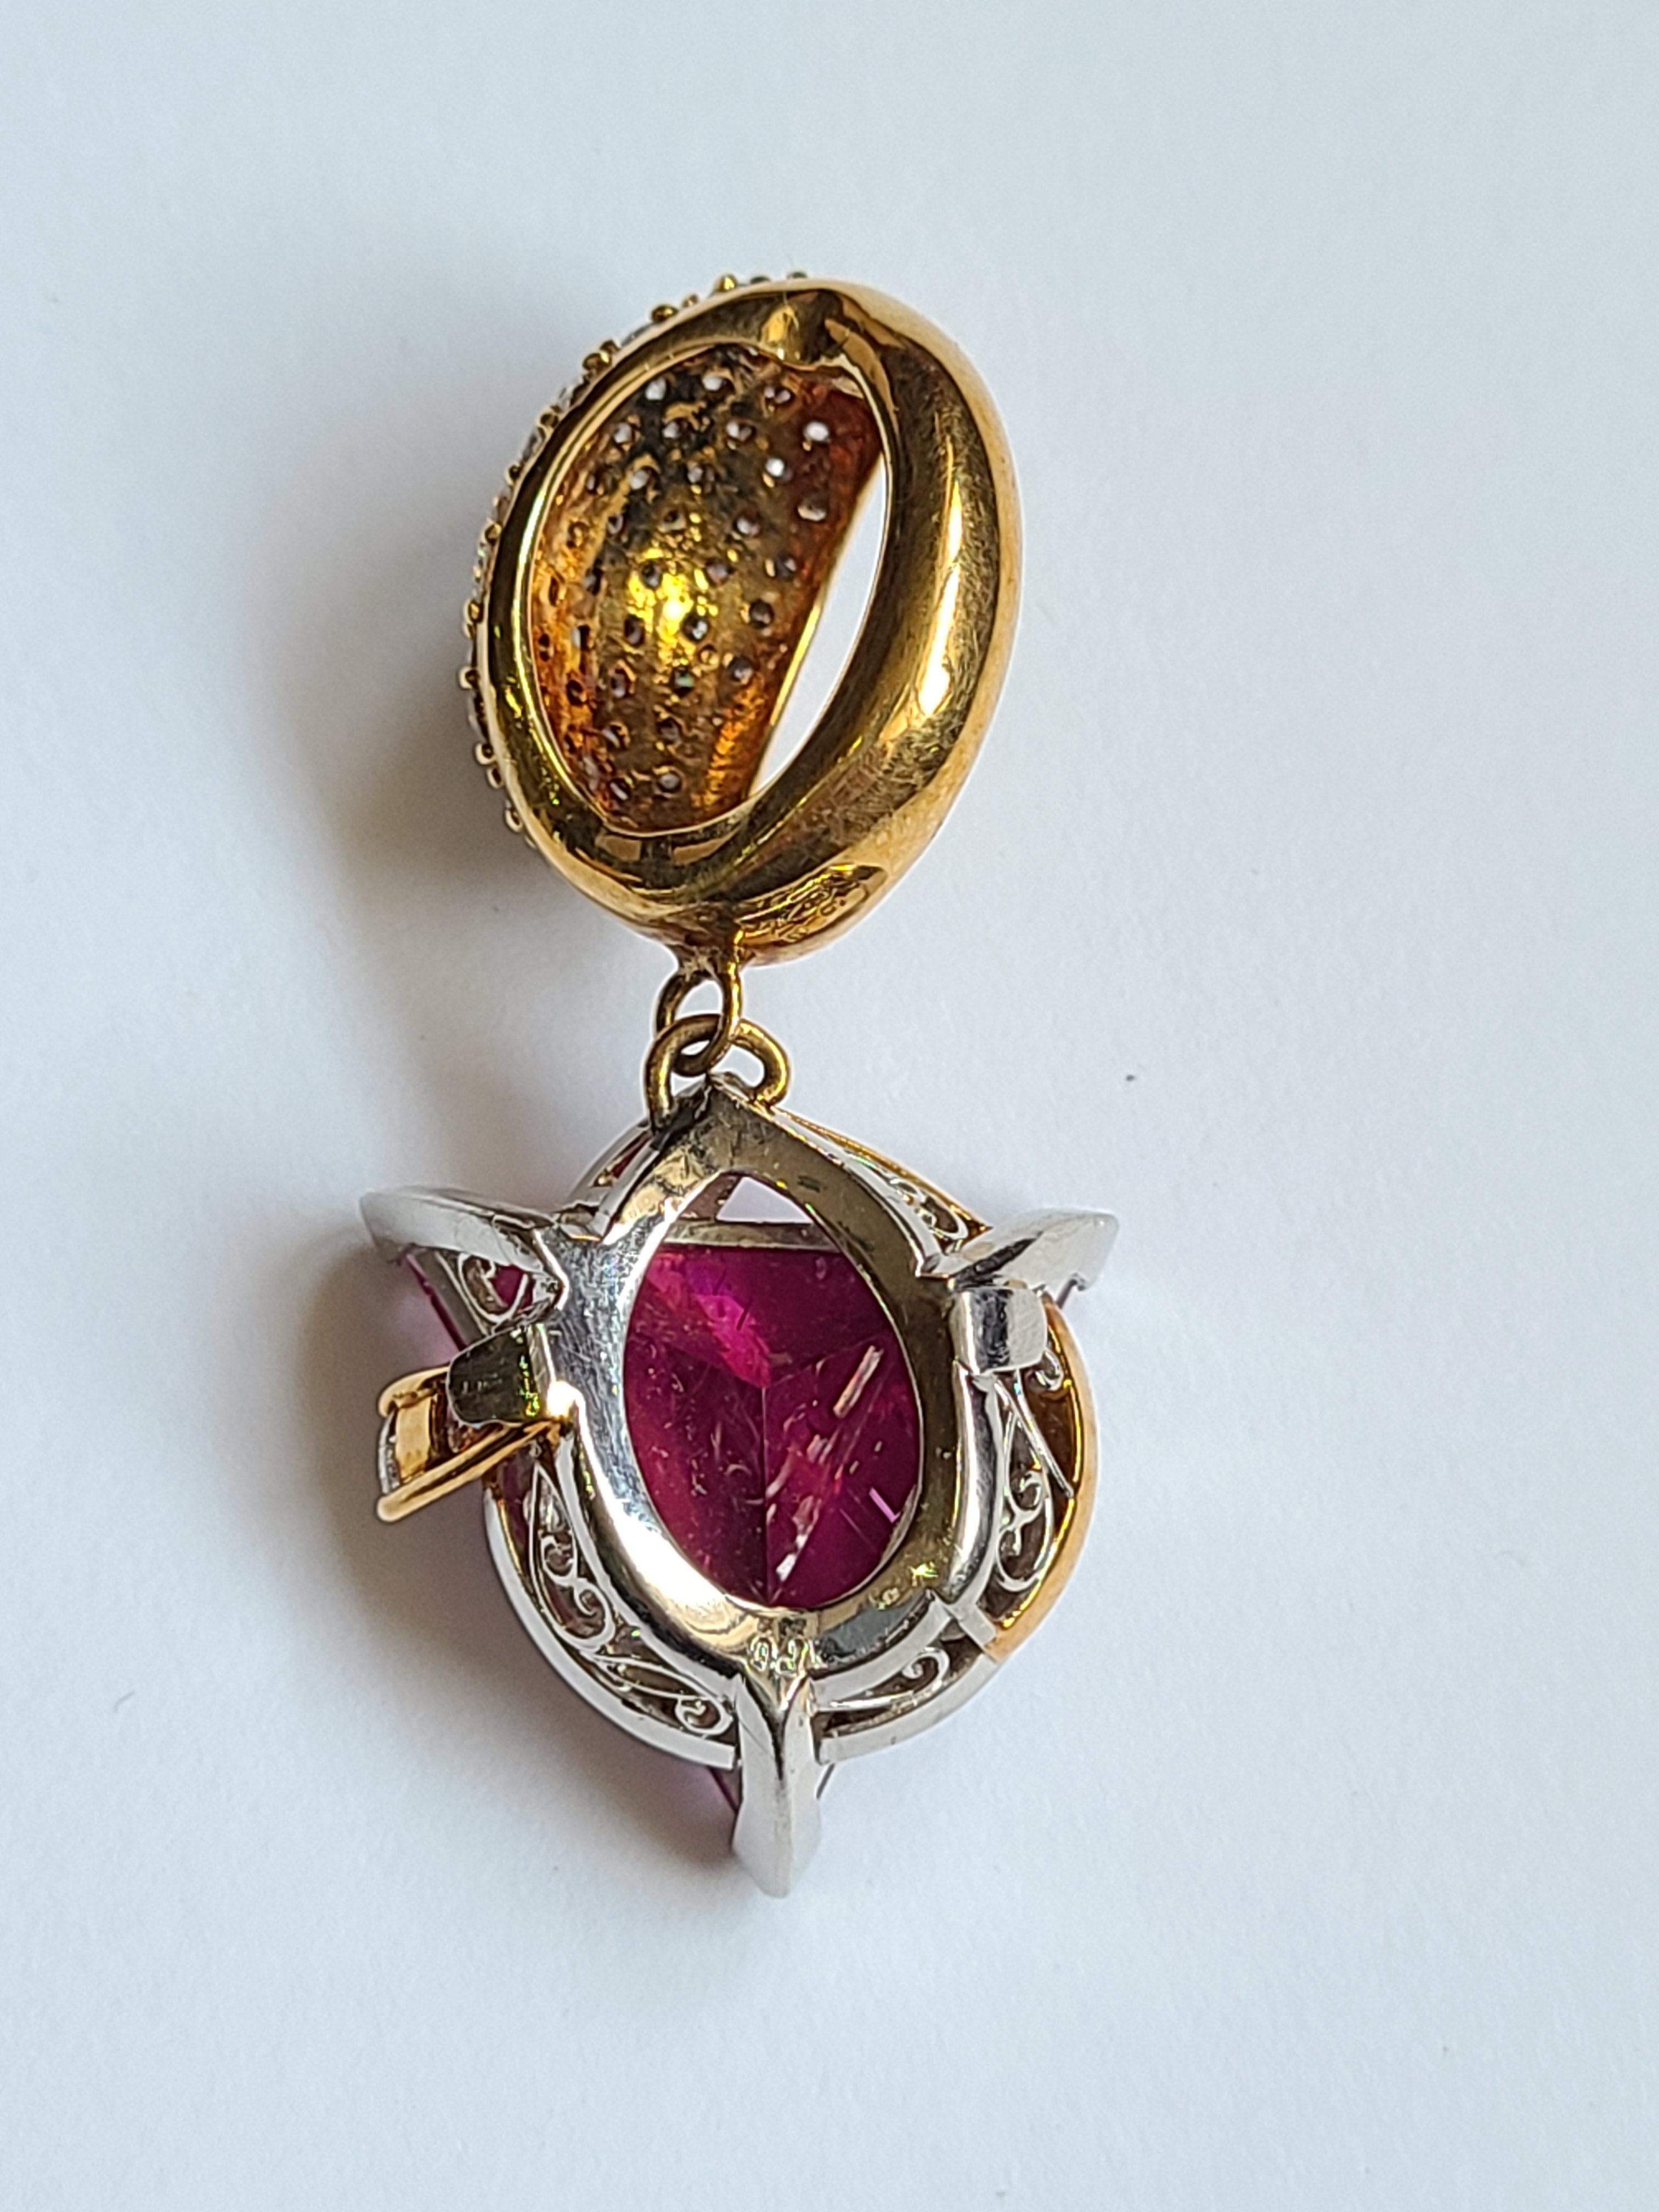 A pretty and modern rubellite pendant set in gold and platinum with diamonds. The Gross weight of the pendant is 16.13 grams and diamond weight is 1.16 carats. The pendant dimensions in cm 4 x 1 x .06 (LXWXH)